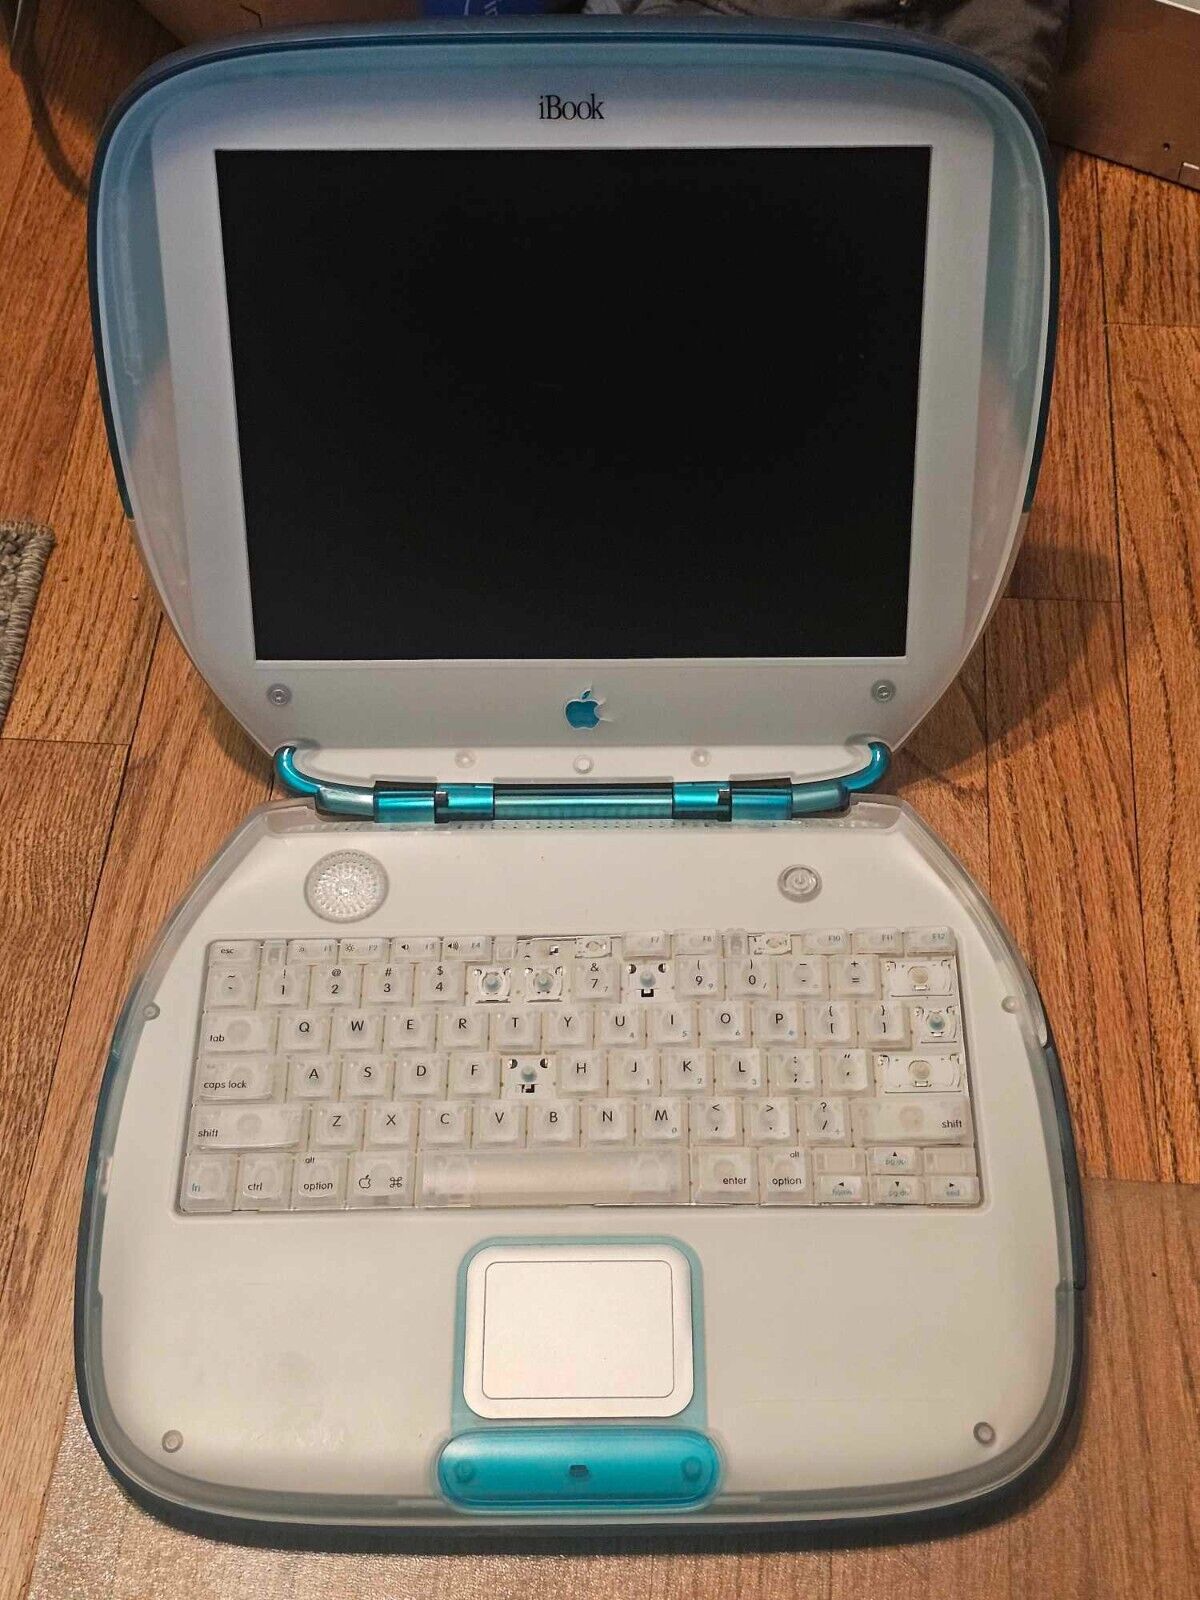 Clean Apple iBook G3 Clamshell Blueberry Powerbook 300MHz 32MB - Tech Special